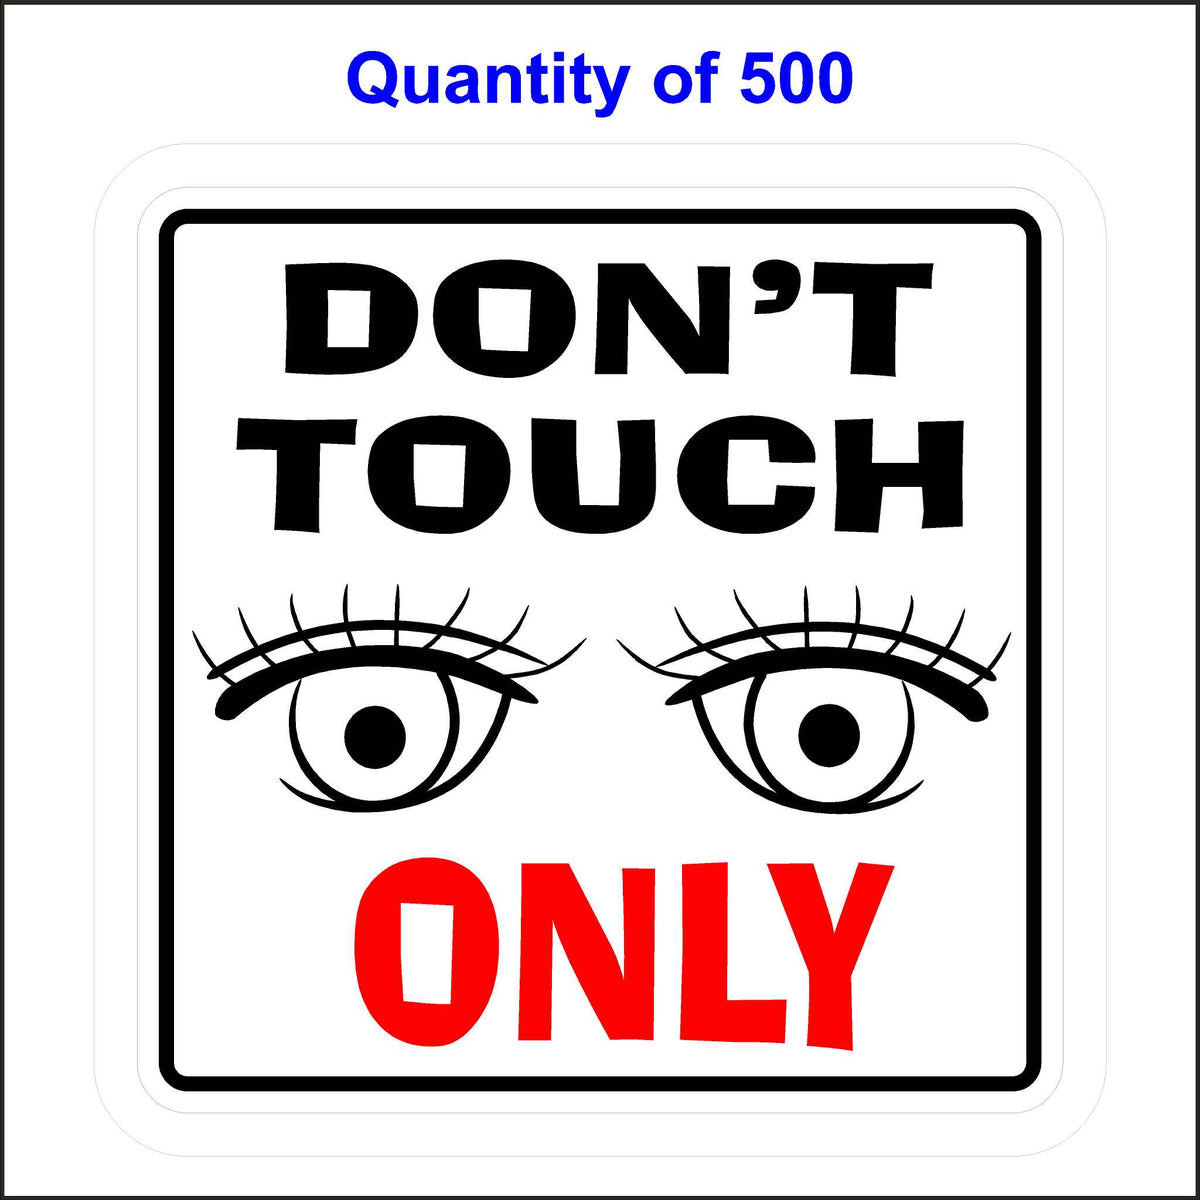 Don’t Touch, Look Only Sticker. Black and Red Text With Eyeballs Looking At You. 500 Quantity.